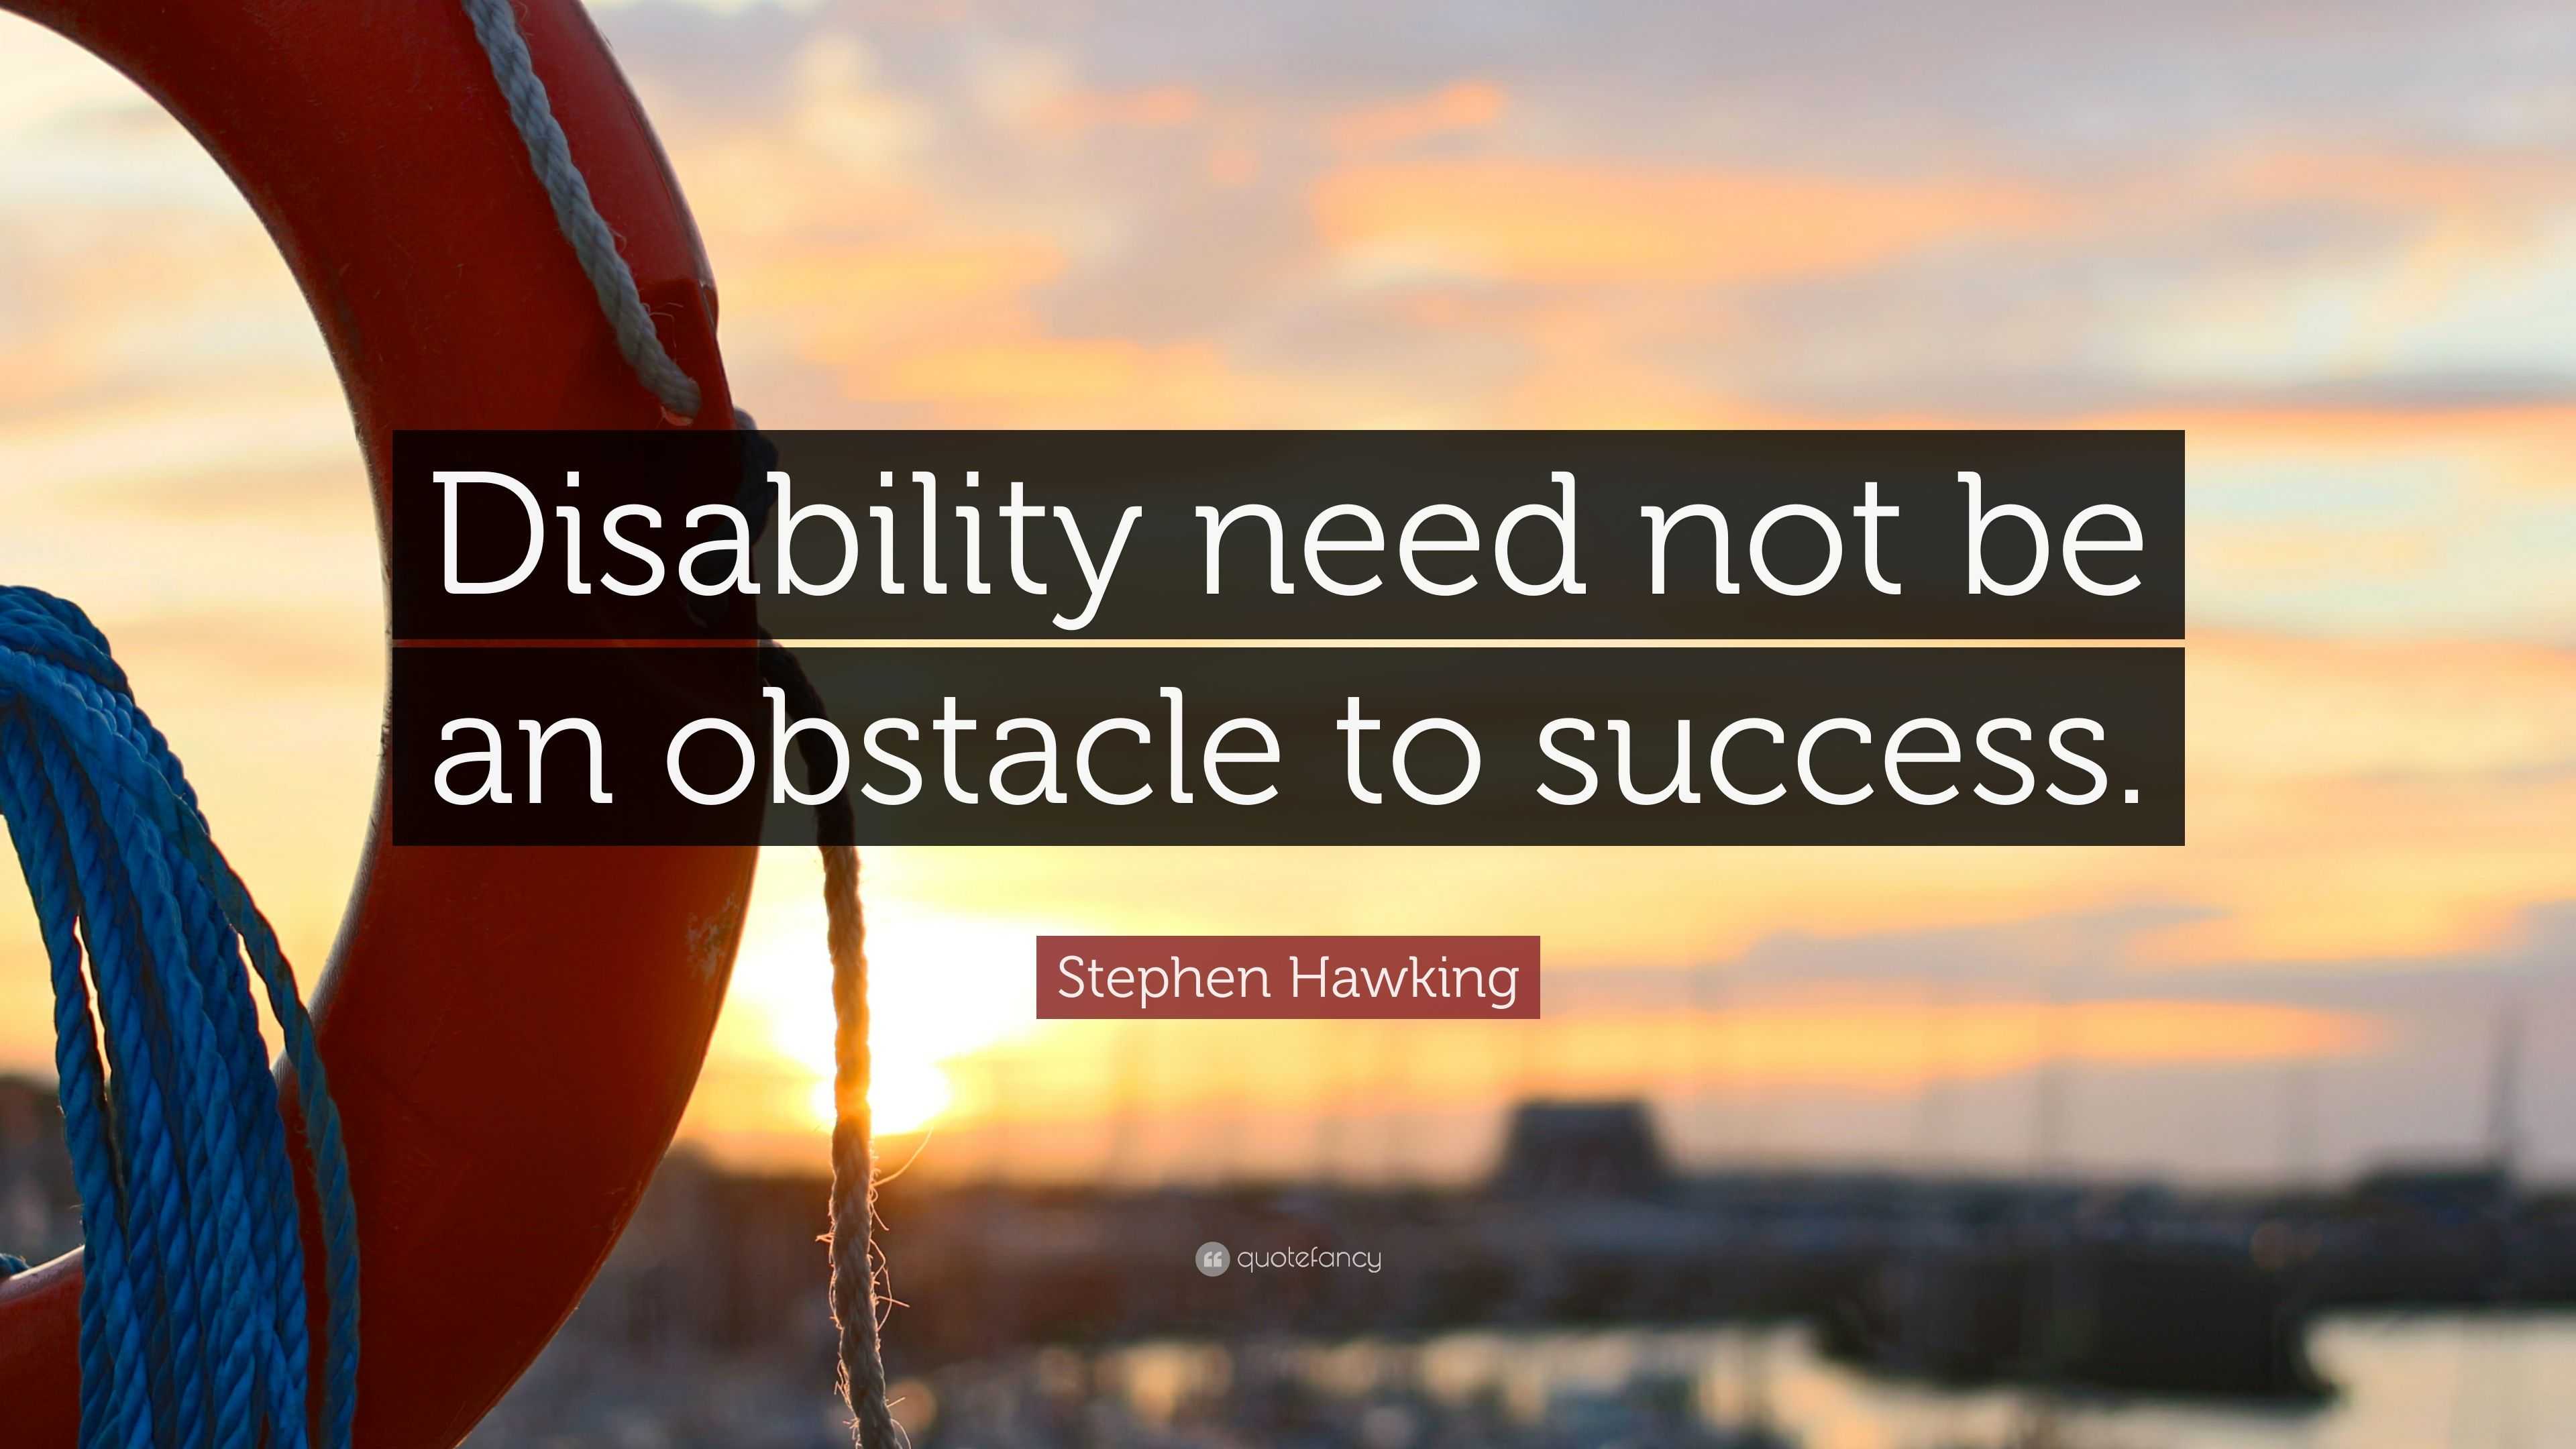 write an essay disability is not an obstacle for success